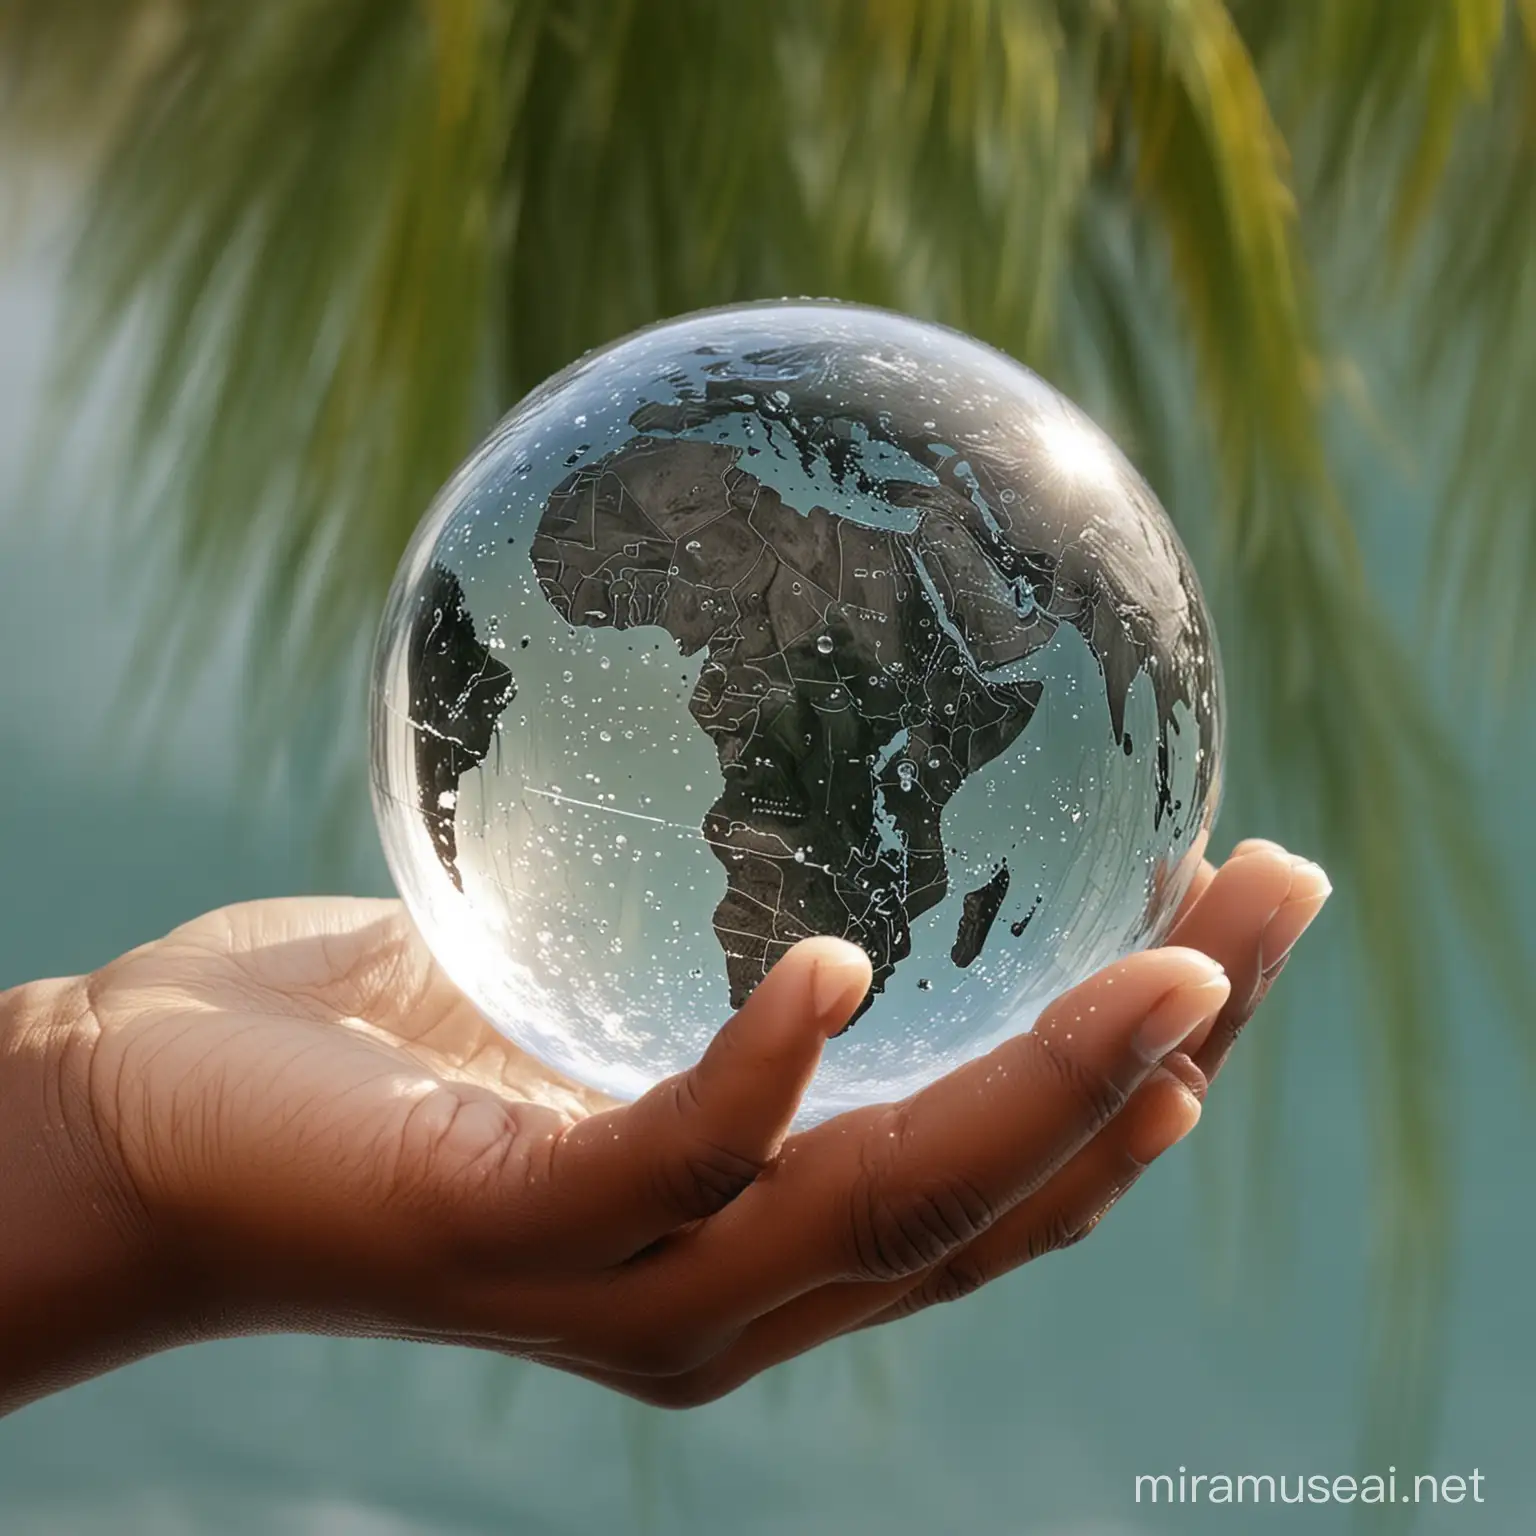 Black Child Holding Earth Globe in Bubble of Water